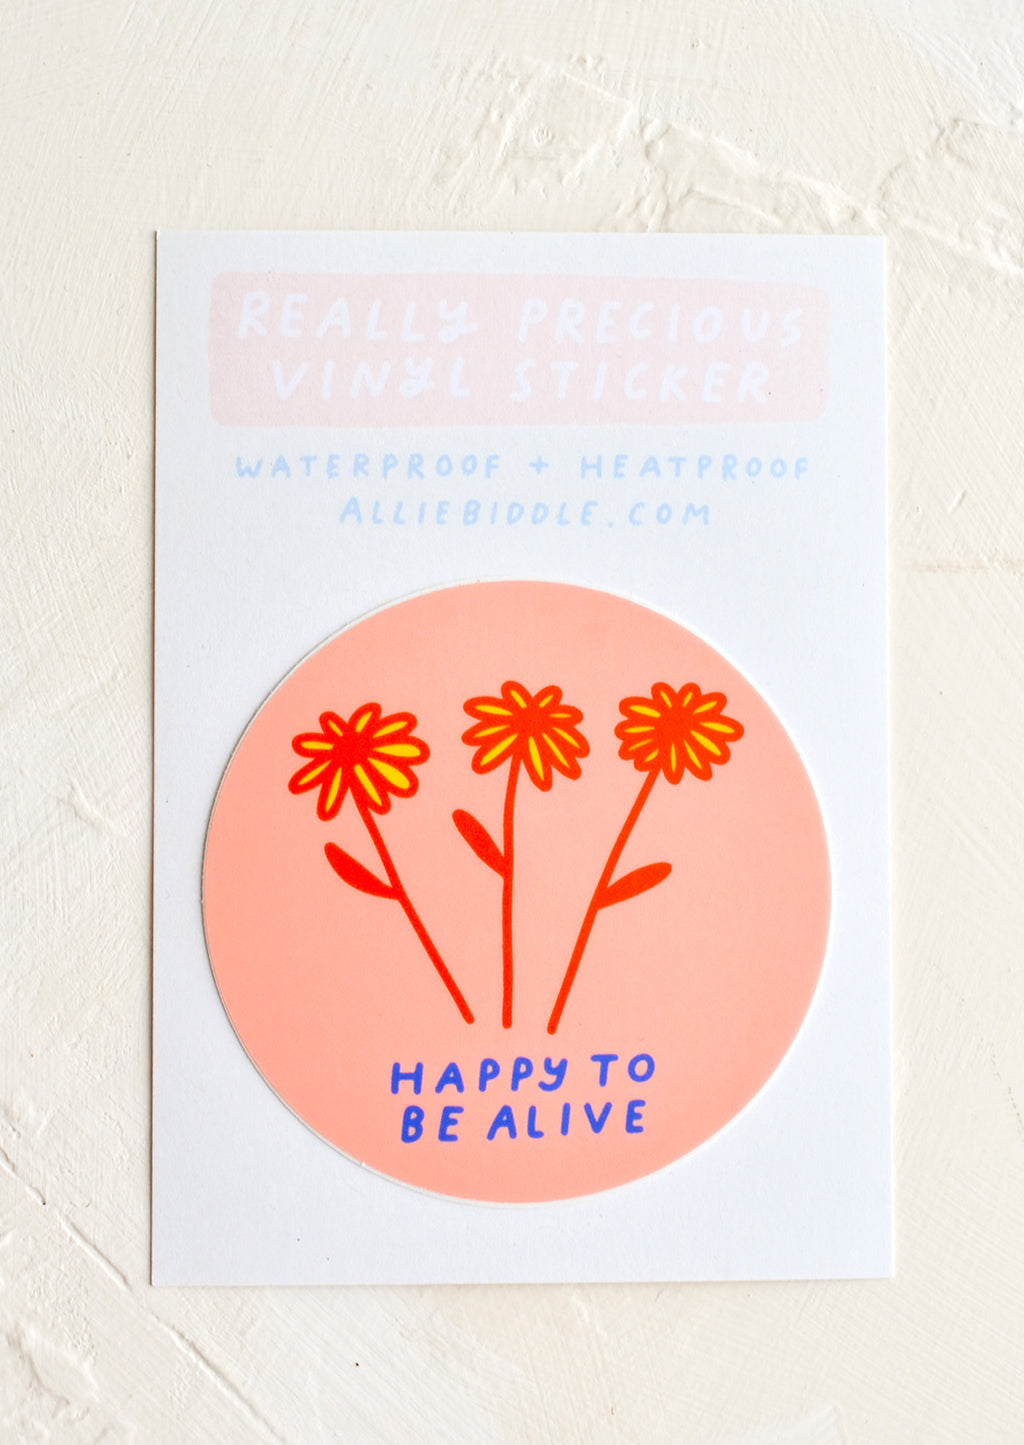 Happy to Be Alive: A circular vinyl sticker reading "happy to be alive" below a floral illustration.